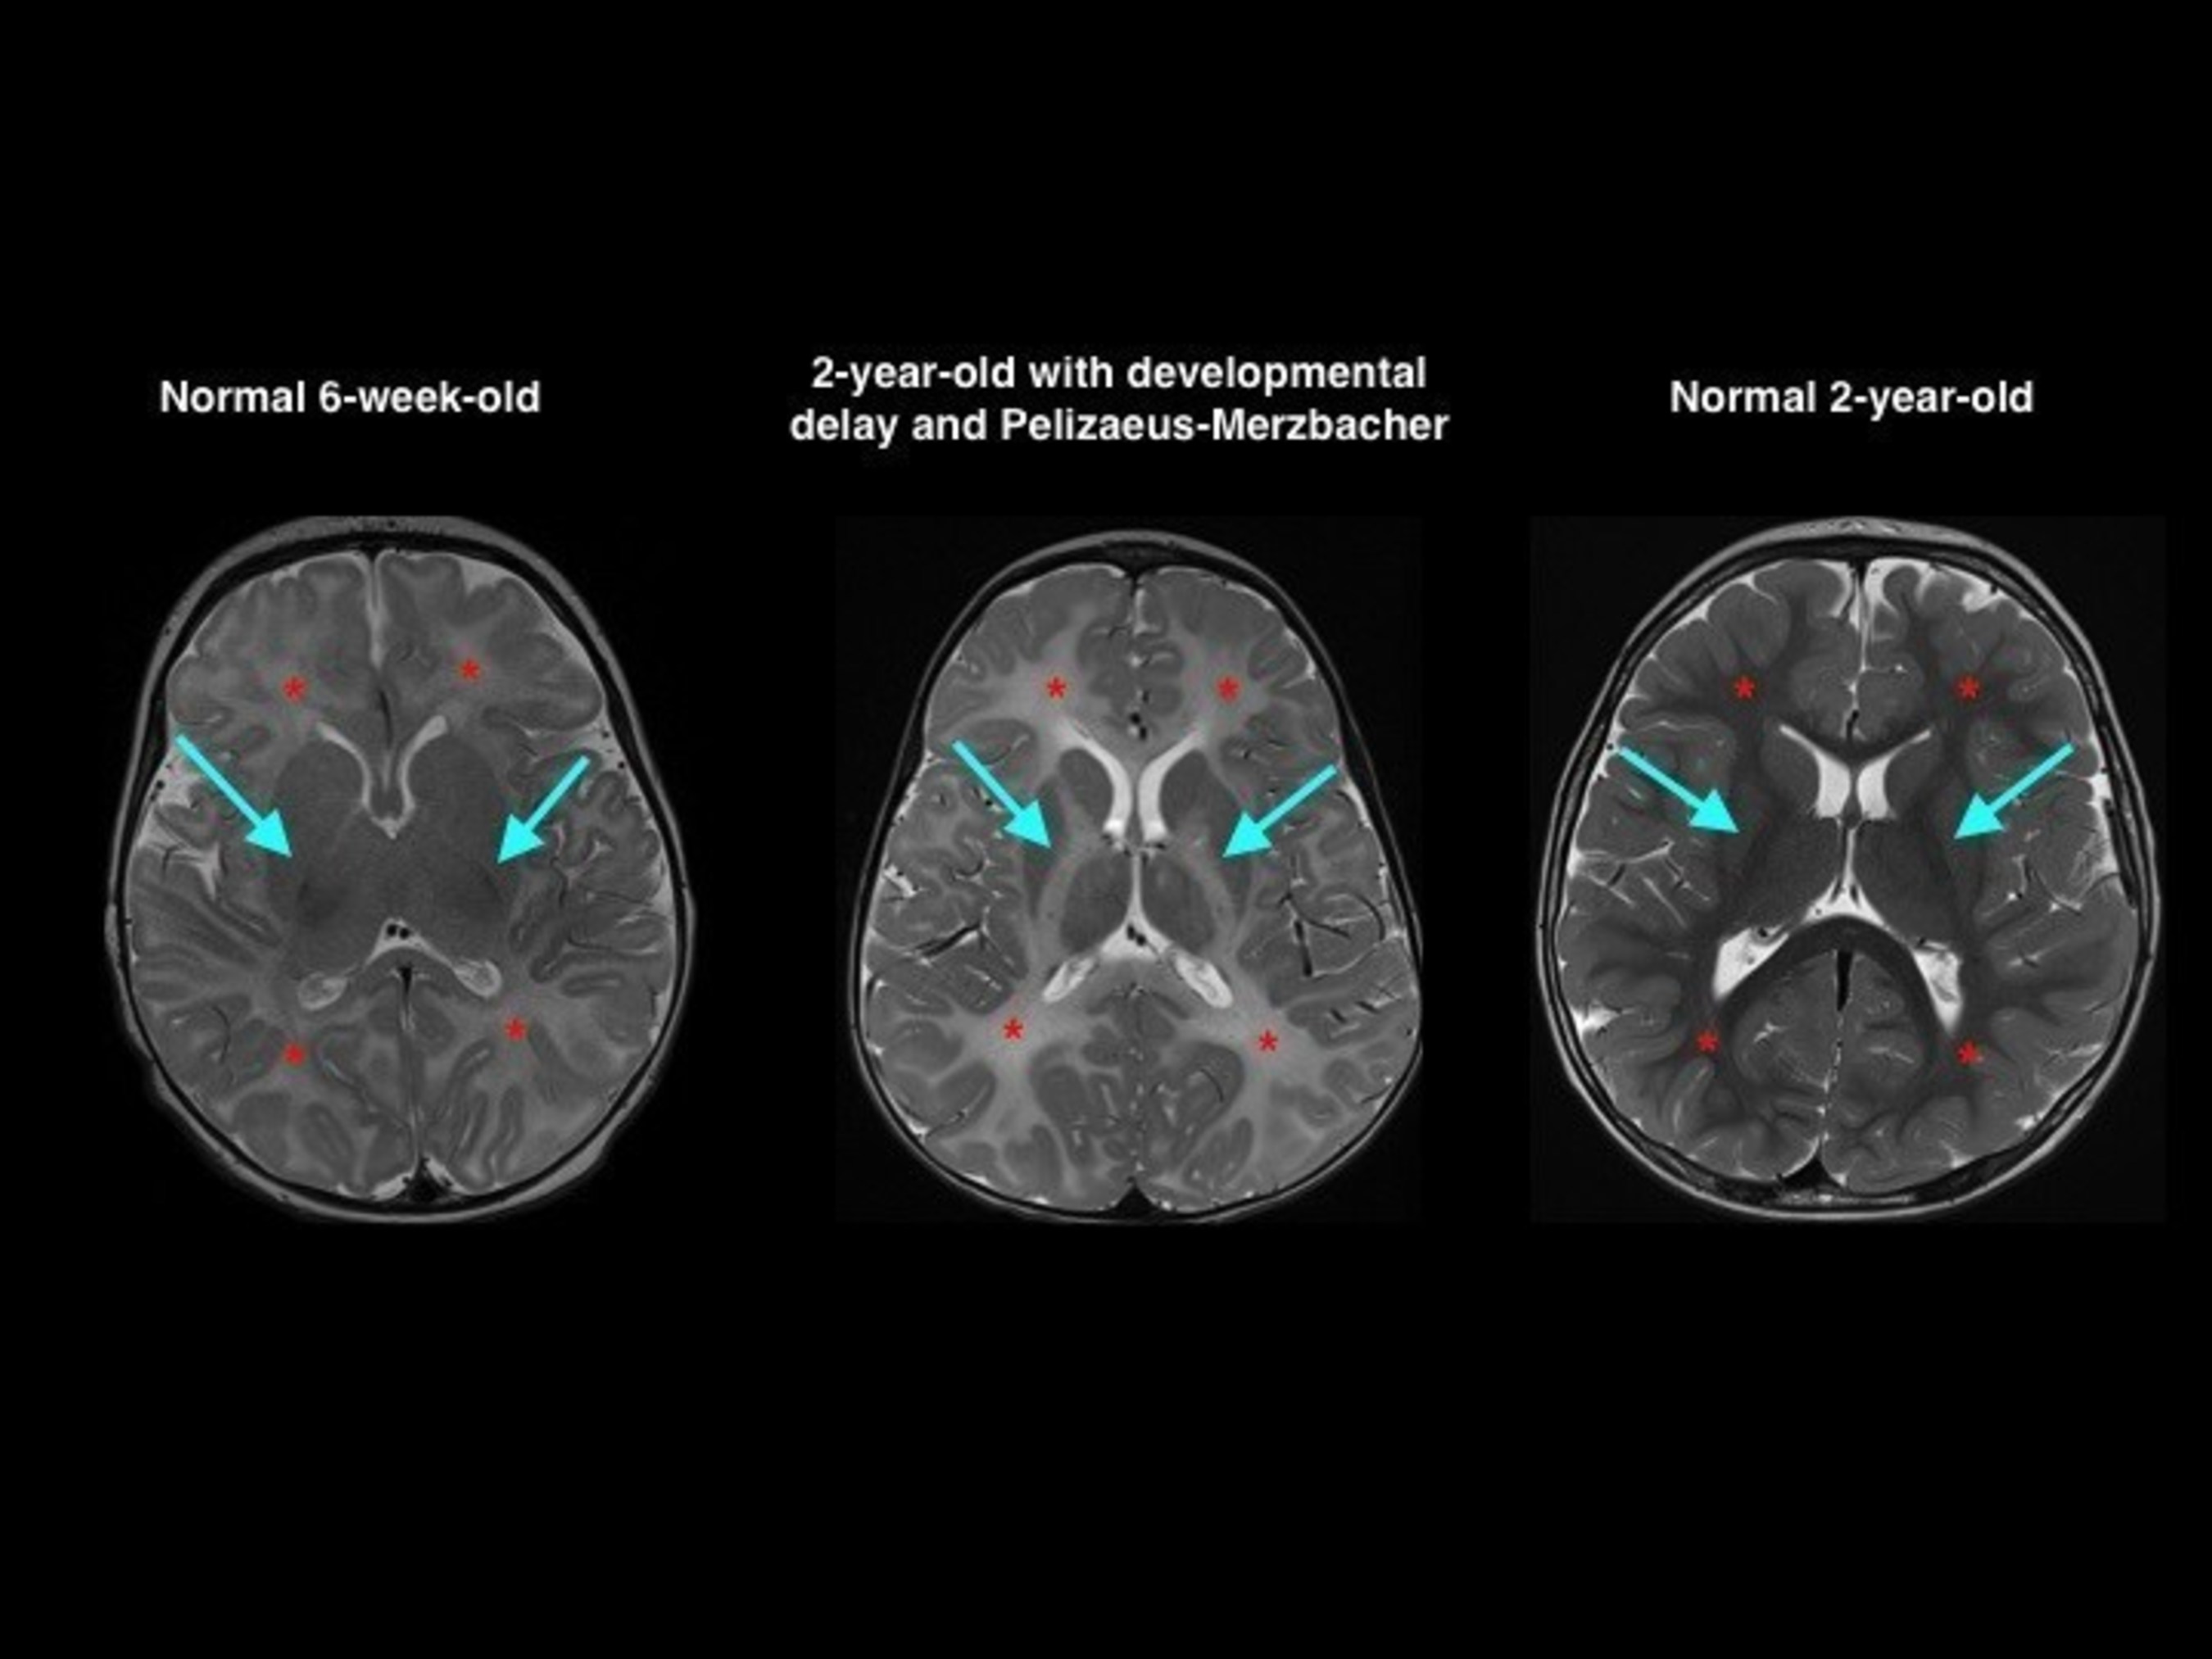 Many features of children's brains are age-specific such as the adding of myelin to nerve fibers. On these axial T2-weighted MRI scans, the addition of myelin makes the white matter appear darker over time. Comparing the normal 6-week-old with the normal 2-year-old, the white matter is much darker in the 2-year-old, both in the deep regions of the brain (shown by arrows) and in the white matter of the cerebral hemispheres (asterisks). The 2-year-old with developmental delay, due to Pelizaeus-Merzbacher disease, has a striking absence of myelination throughout the brain. Note the brightness at the posterior limb of the internal capsule (arrows) and in the white matter of the cerebral hemispheres (asterisks). This myelination pattern is much closer in appearance to that of the normal 6-week-old than that of a normal 2-year-old but is sometimes missed because the pattern is symmetrical. Providing reference images can help clinicians not accustomed to looking at pediatric brain scans identify the abnormality.